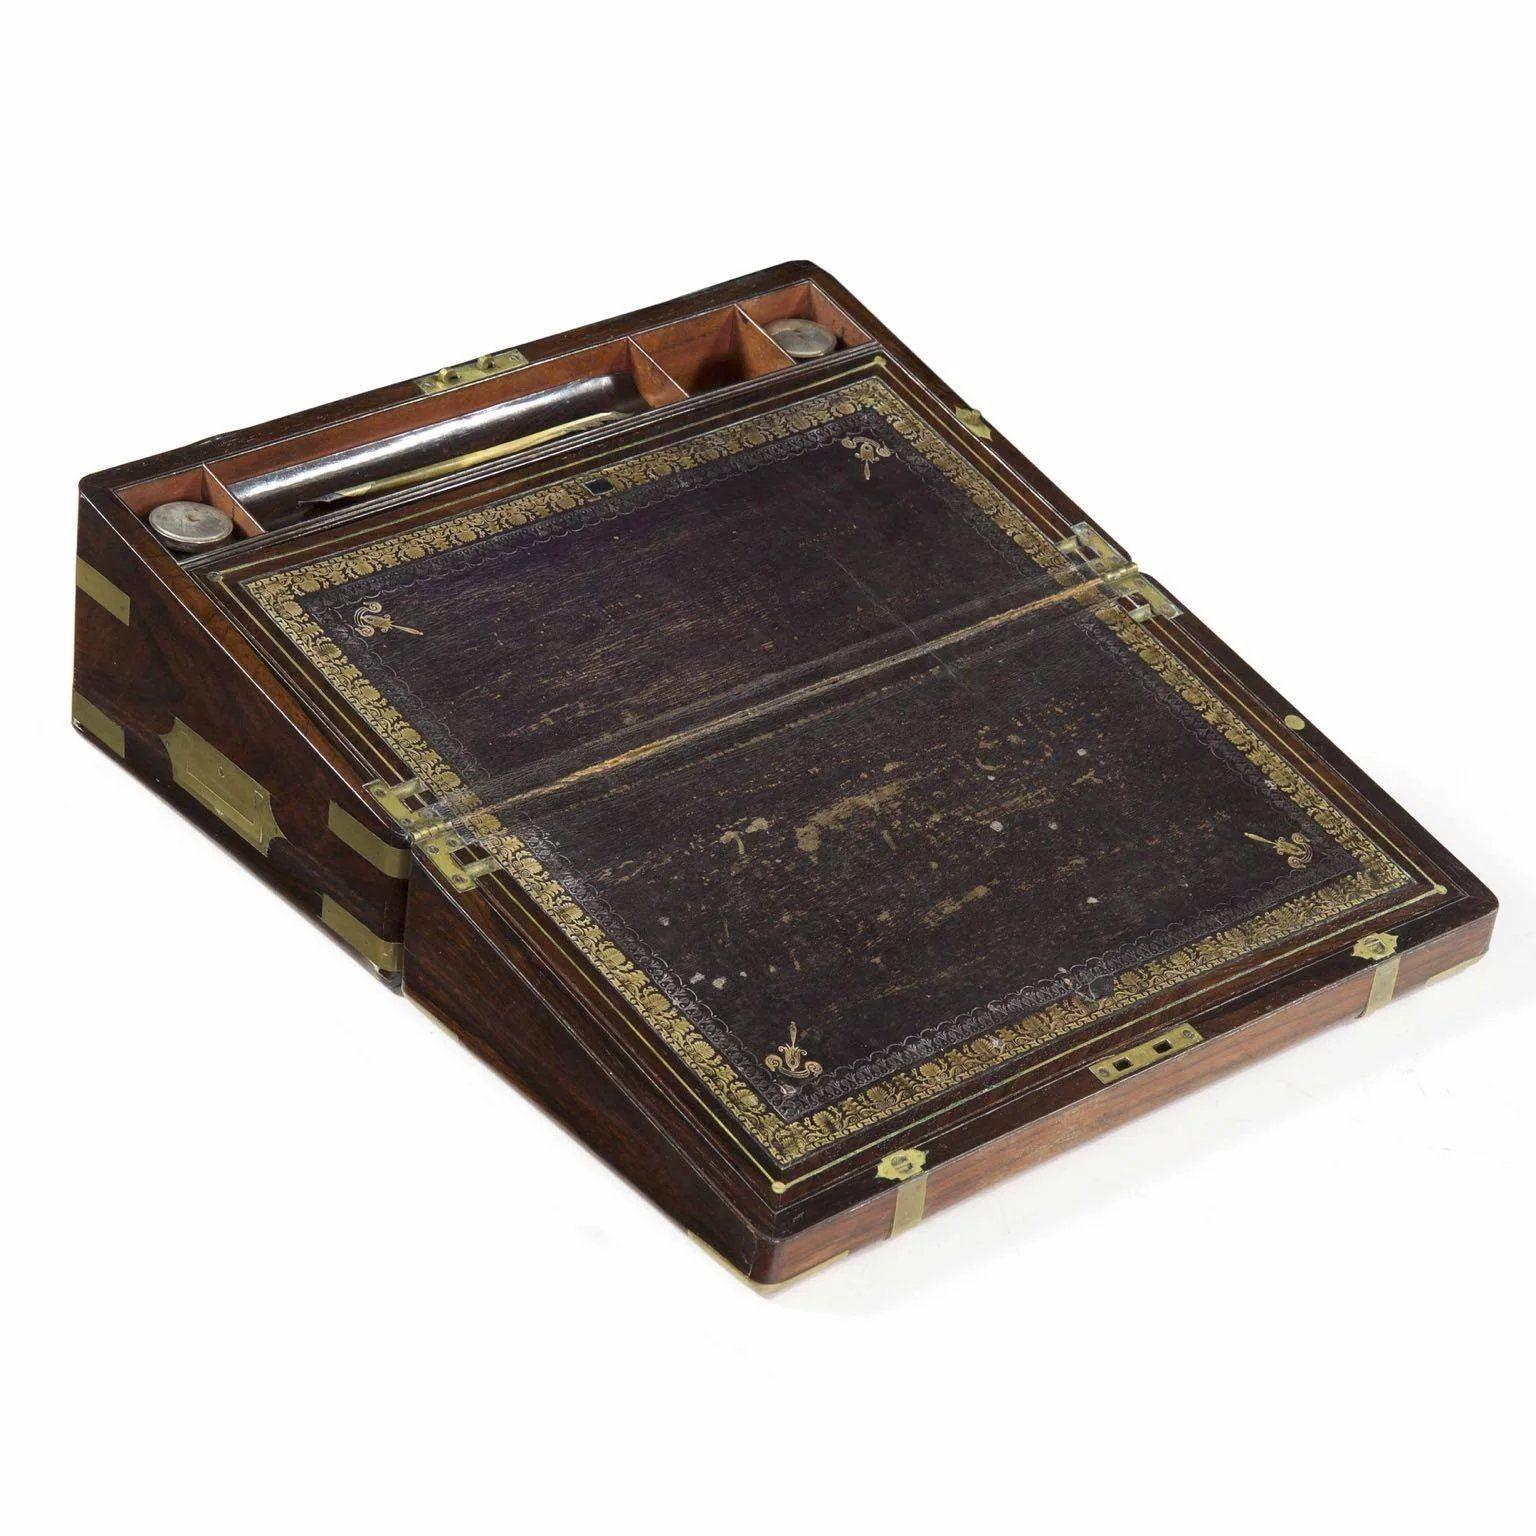 A RARE AND FINE REGENCY ROSEWOOD WRITING SLOPE
England, ca. 1815  Includes a quill by Isaac Parkes
Item # 801EZX27


An inordinately fine box, the exterior is dressed with full width and depth rosewood veneers carefully applied to flow between seams